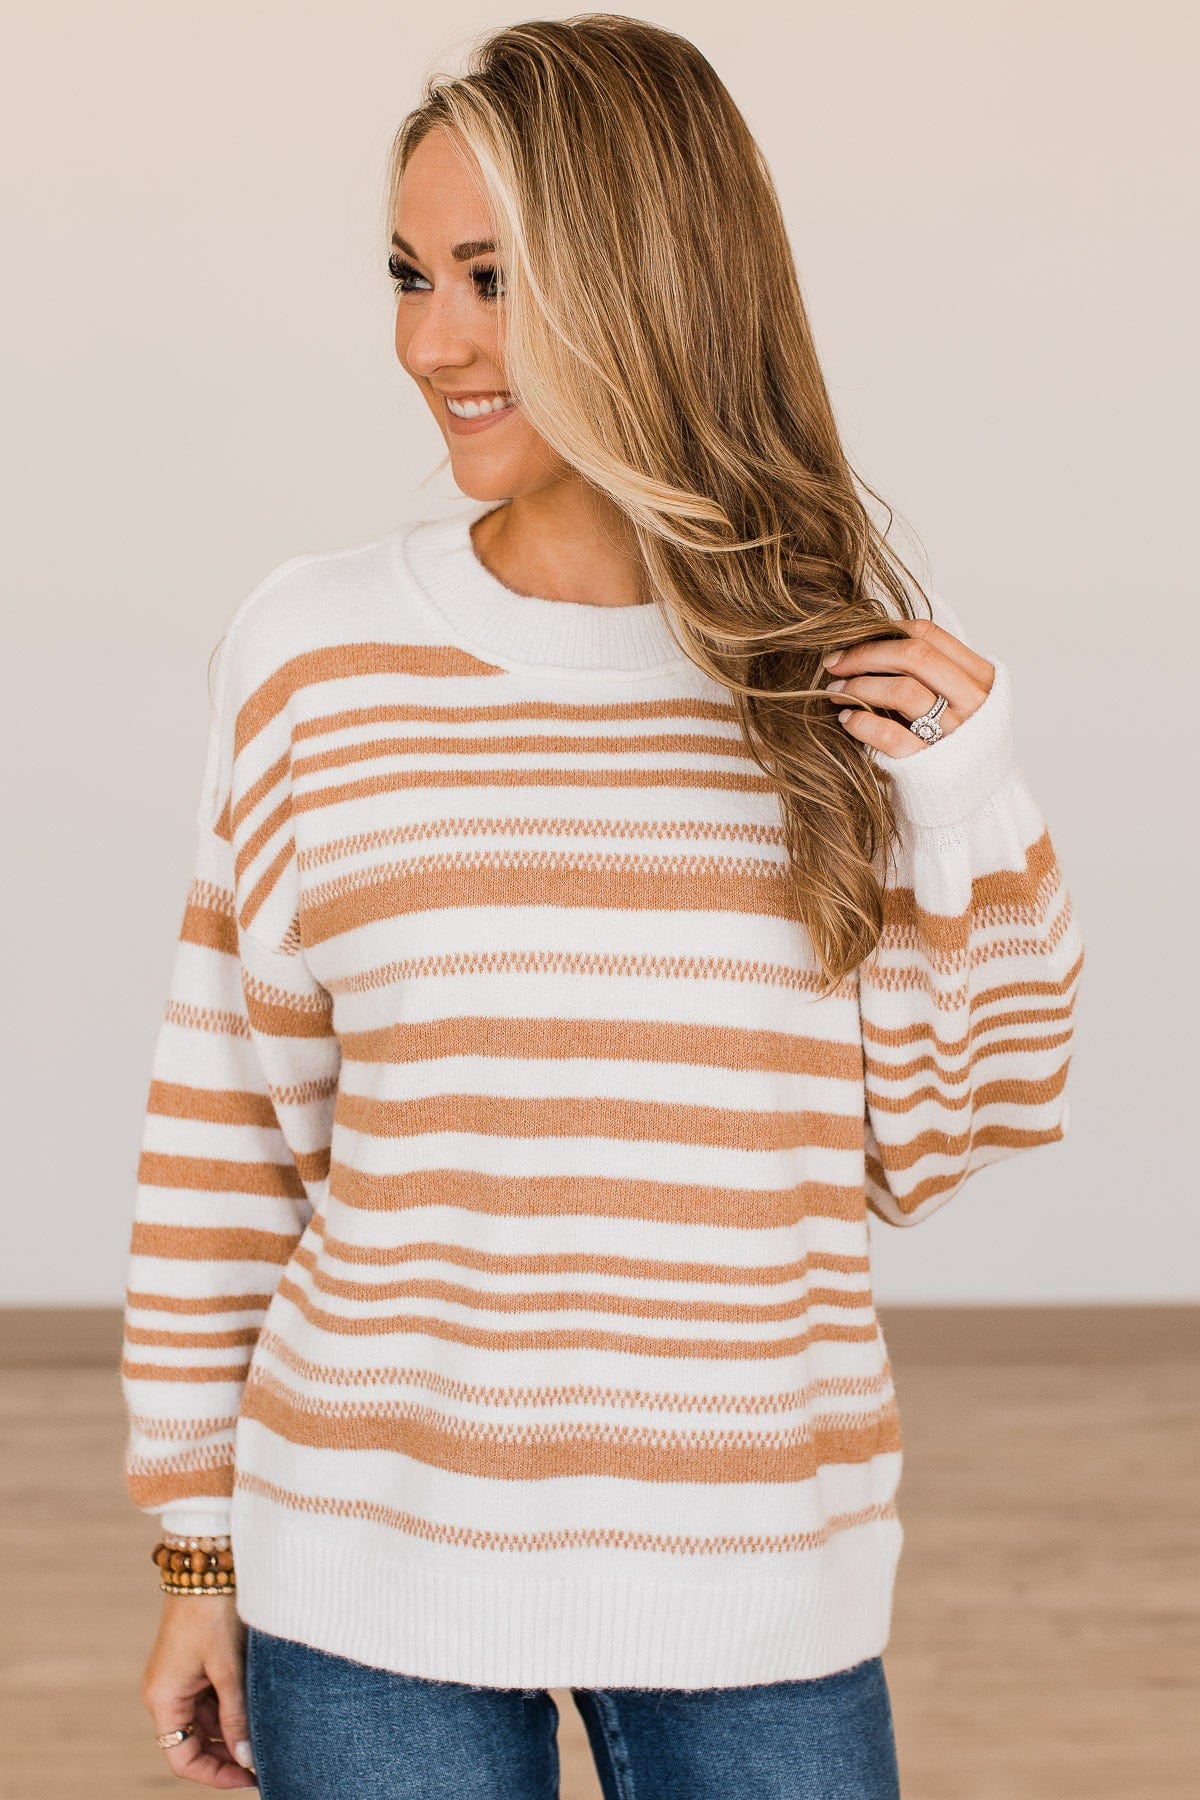 Looking For Love Striped Sweater- Ivory & Camel